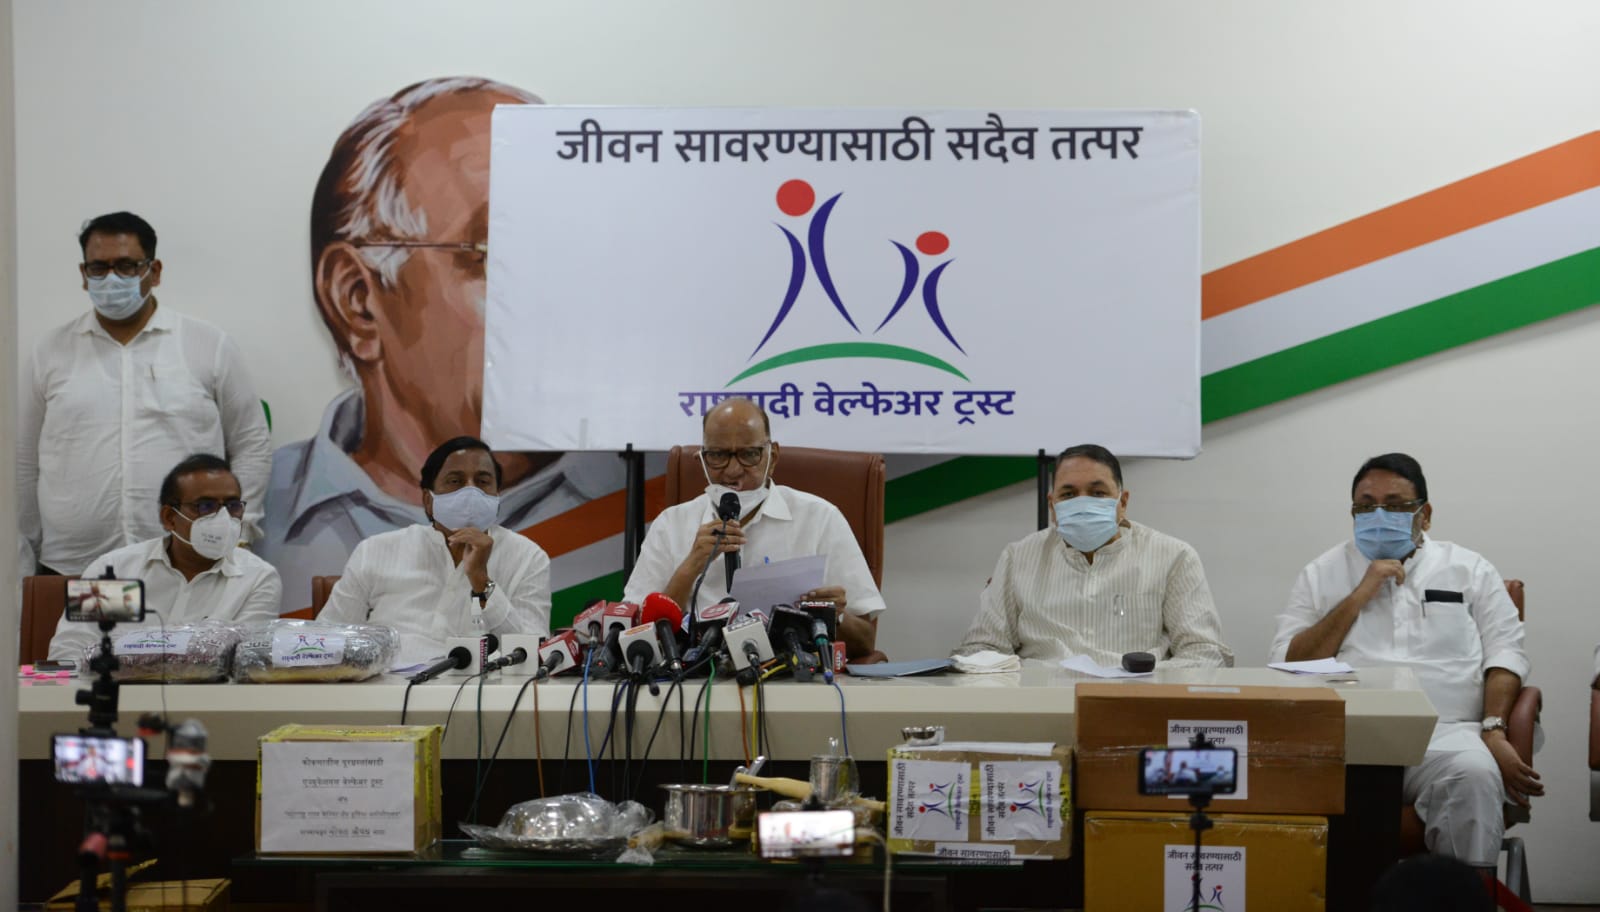 2.5 crore assistance to 16,000 families displaced by floods through NCP Welfare Trust; Sharad Pawar's announcement at the press conference ...